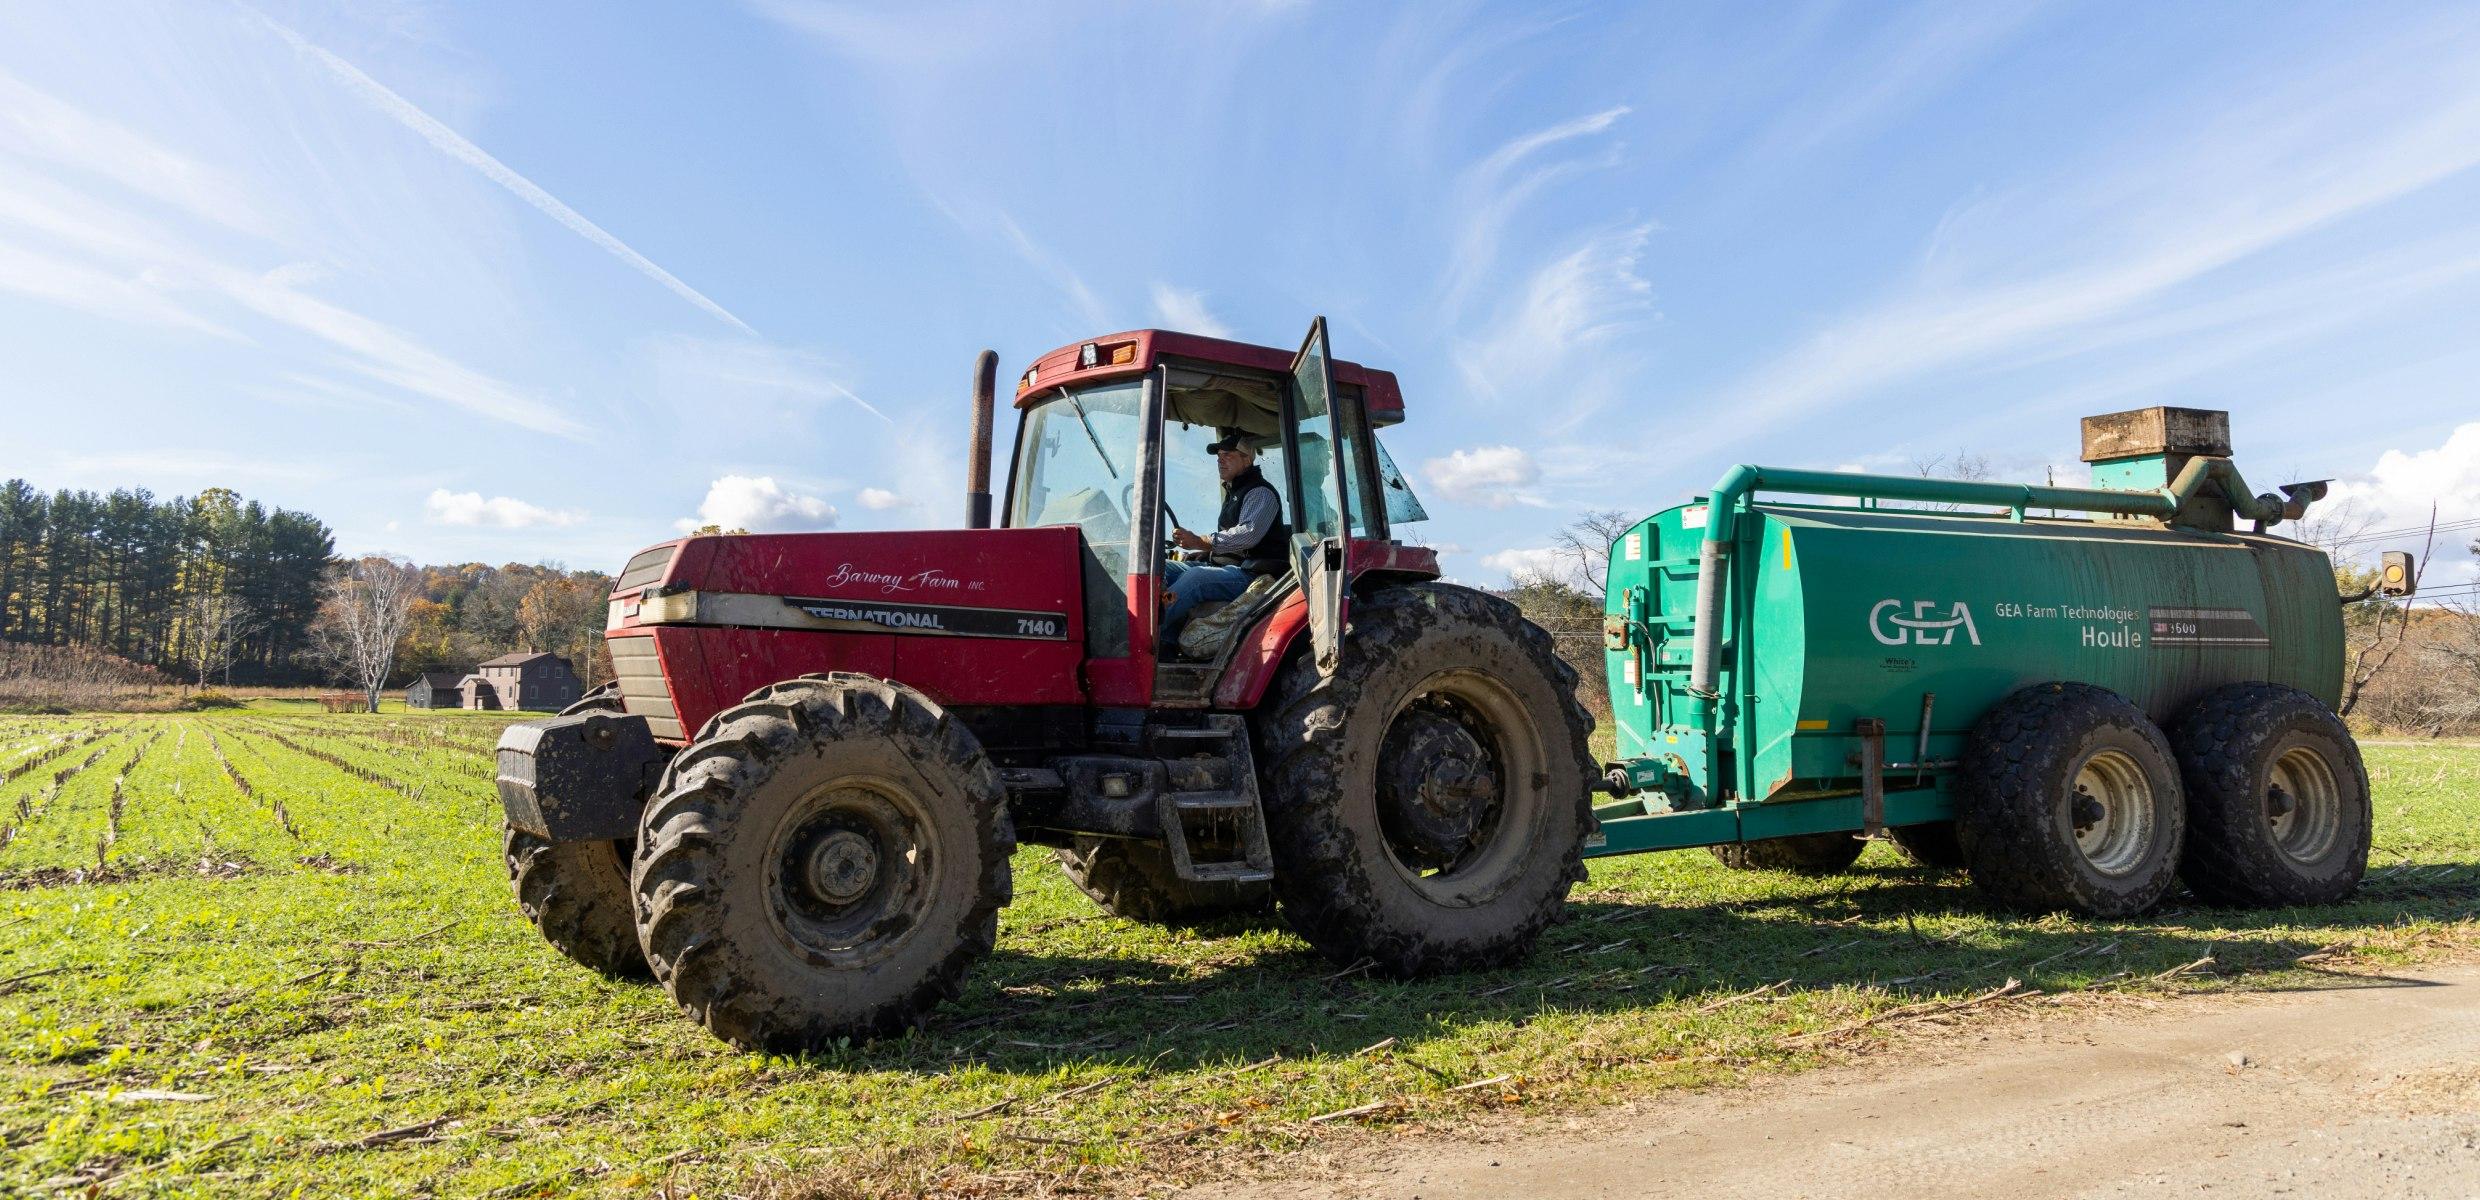 Tractor distributing low-carbon sustainable fertilizer from anaerobic digestion